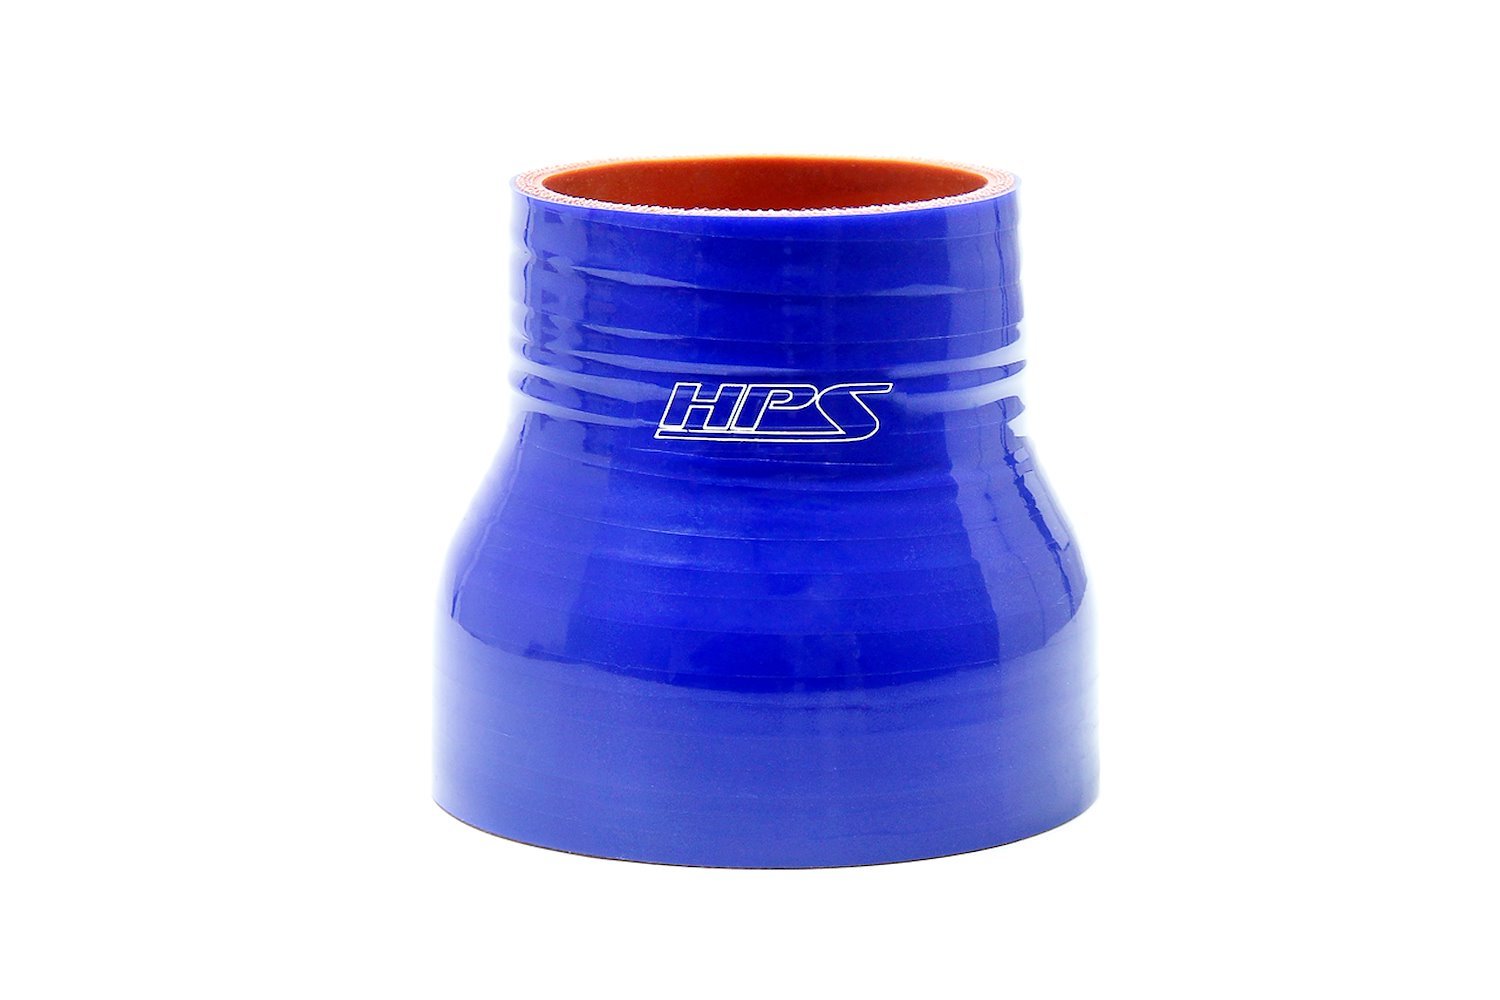 HTSR-150-162-BLUE Silicone Reducer Hose, High-Temp 4-Ply Reinforced, 1-1/2 in. - 1-5/8 in. ID, 3 in. Long, Blue